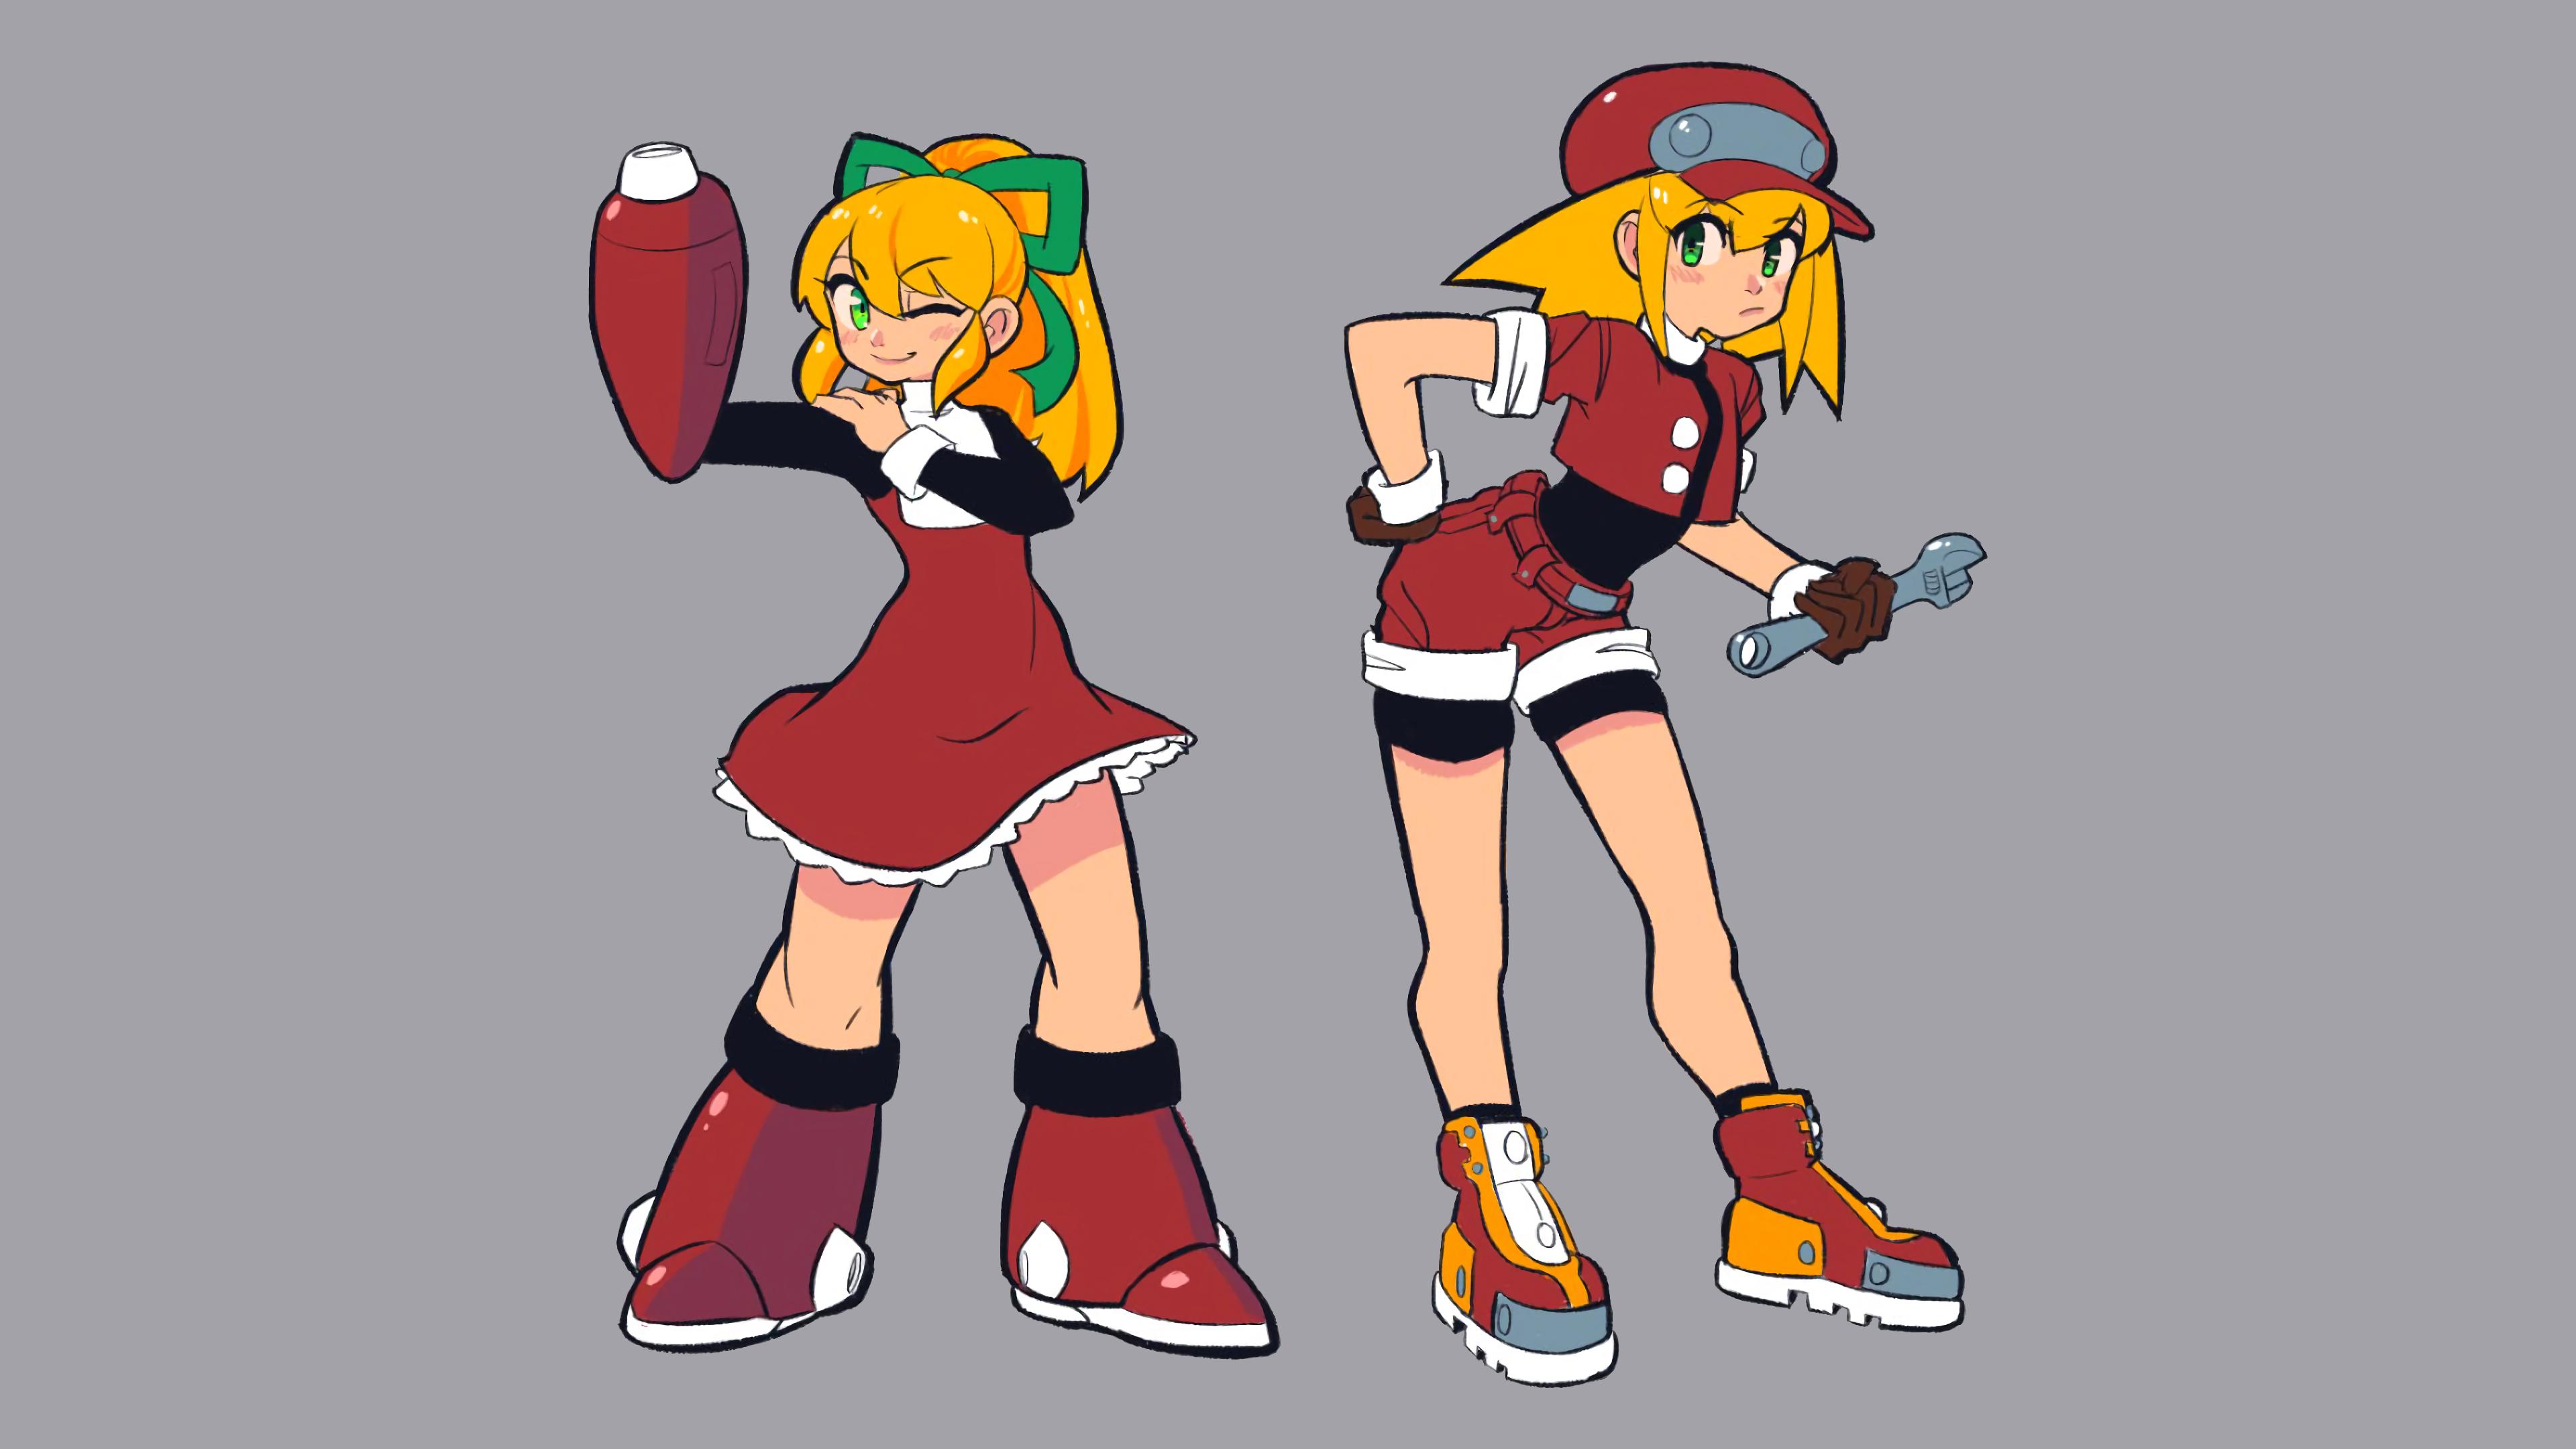 HD wallpaper, Sneakers, Ponytail, Simple Background, Green Eyes, Red Jackets, Capcom, Cannons, Cuffs, Wrench, Red Dress, Looking At Viewer, Video Game Girls, Mega Man, Short Hair, Megaman Legends, Robot, Gloves, Wink, Blonde, Bangs, Ribbon, Fictional Character, Dress, Short Shorts, Shorts, Jean Shorts, Video Games, Rockman, Jacket, Long Hair, Roll